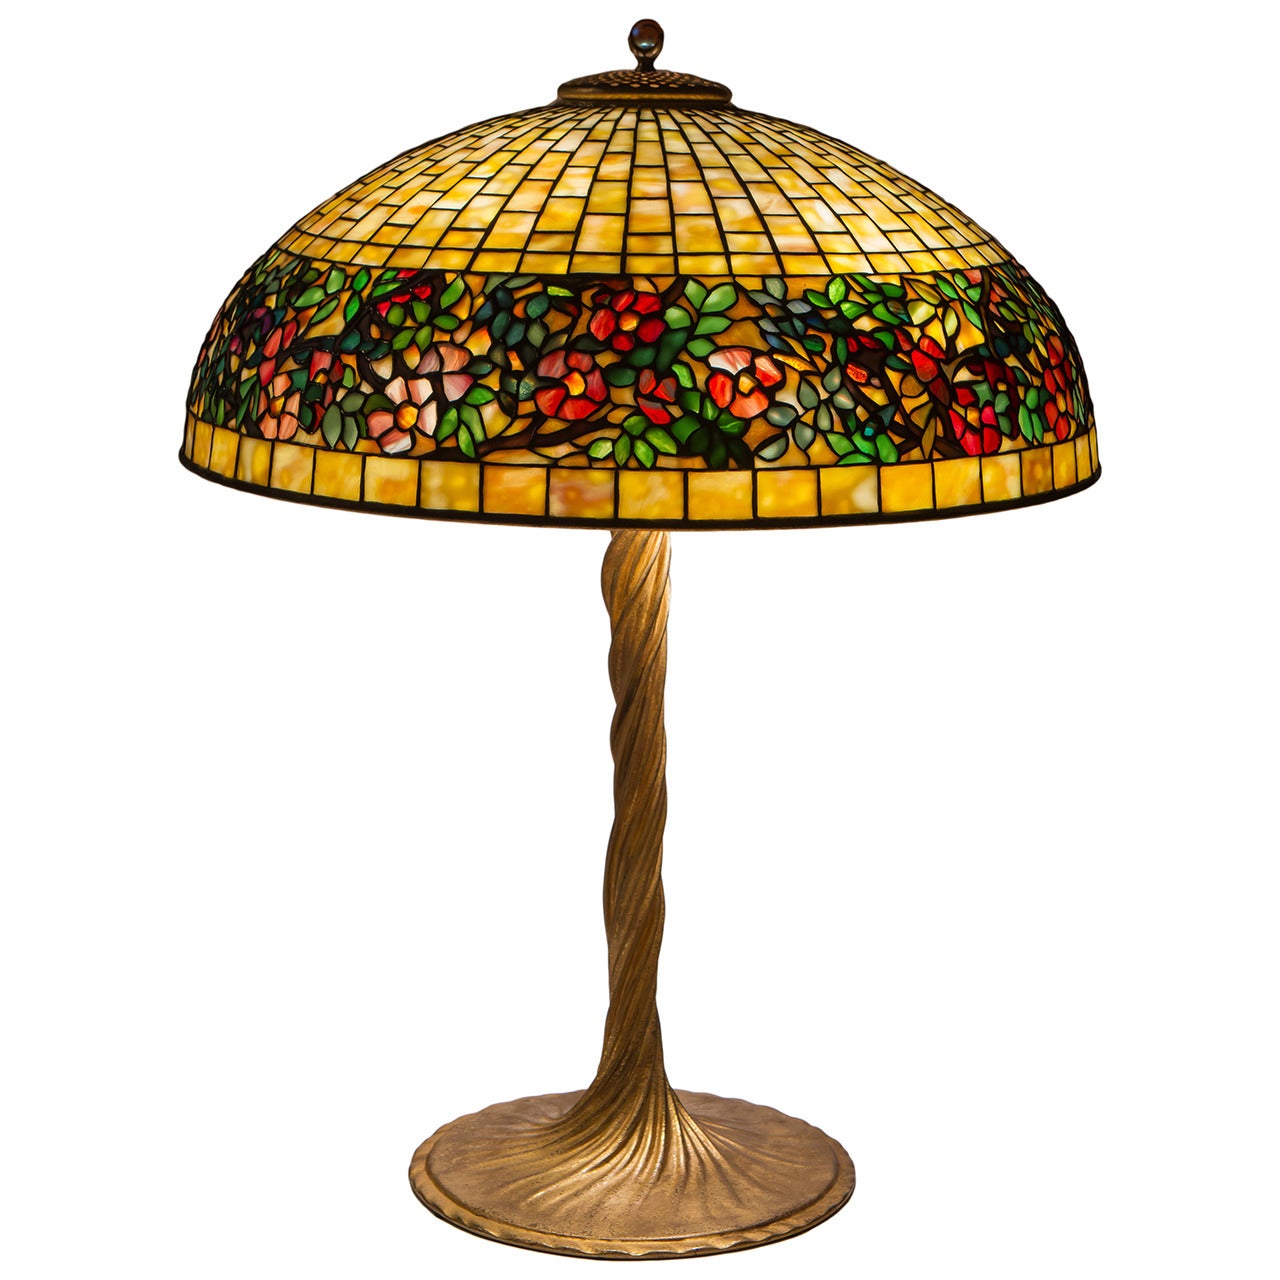 Art Nouveau "Belted Rose" Table Lamp by Tiffany Studios